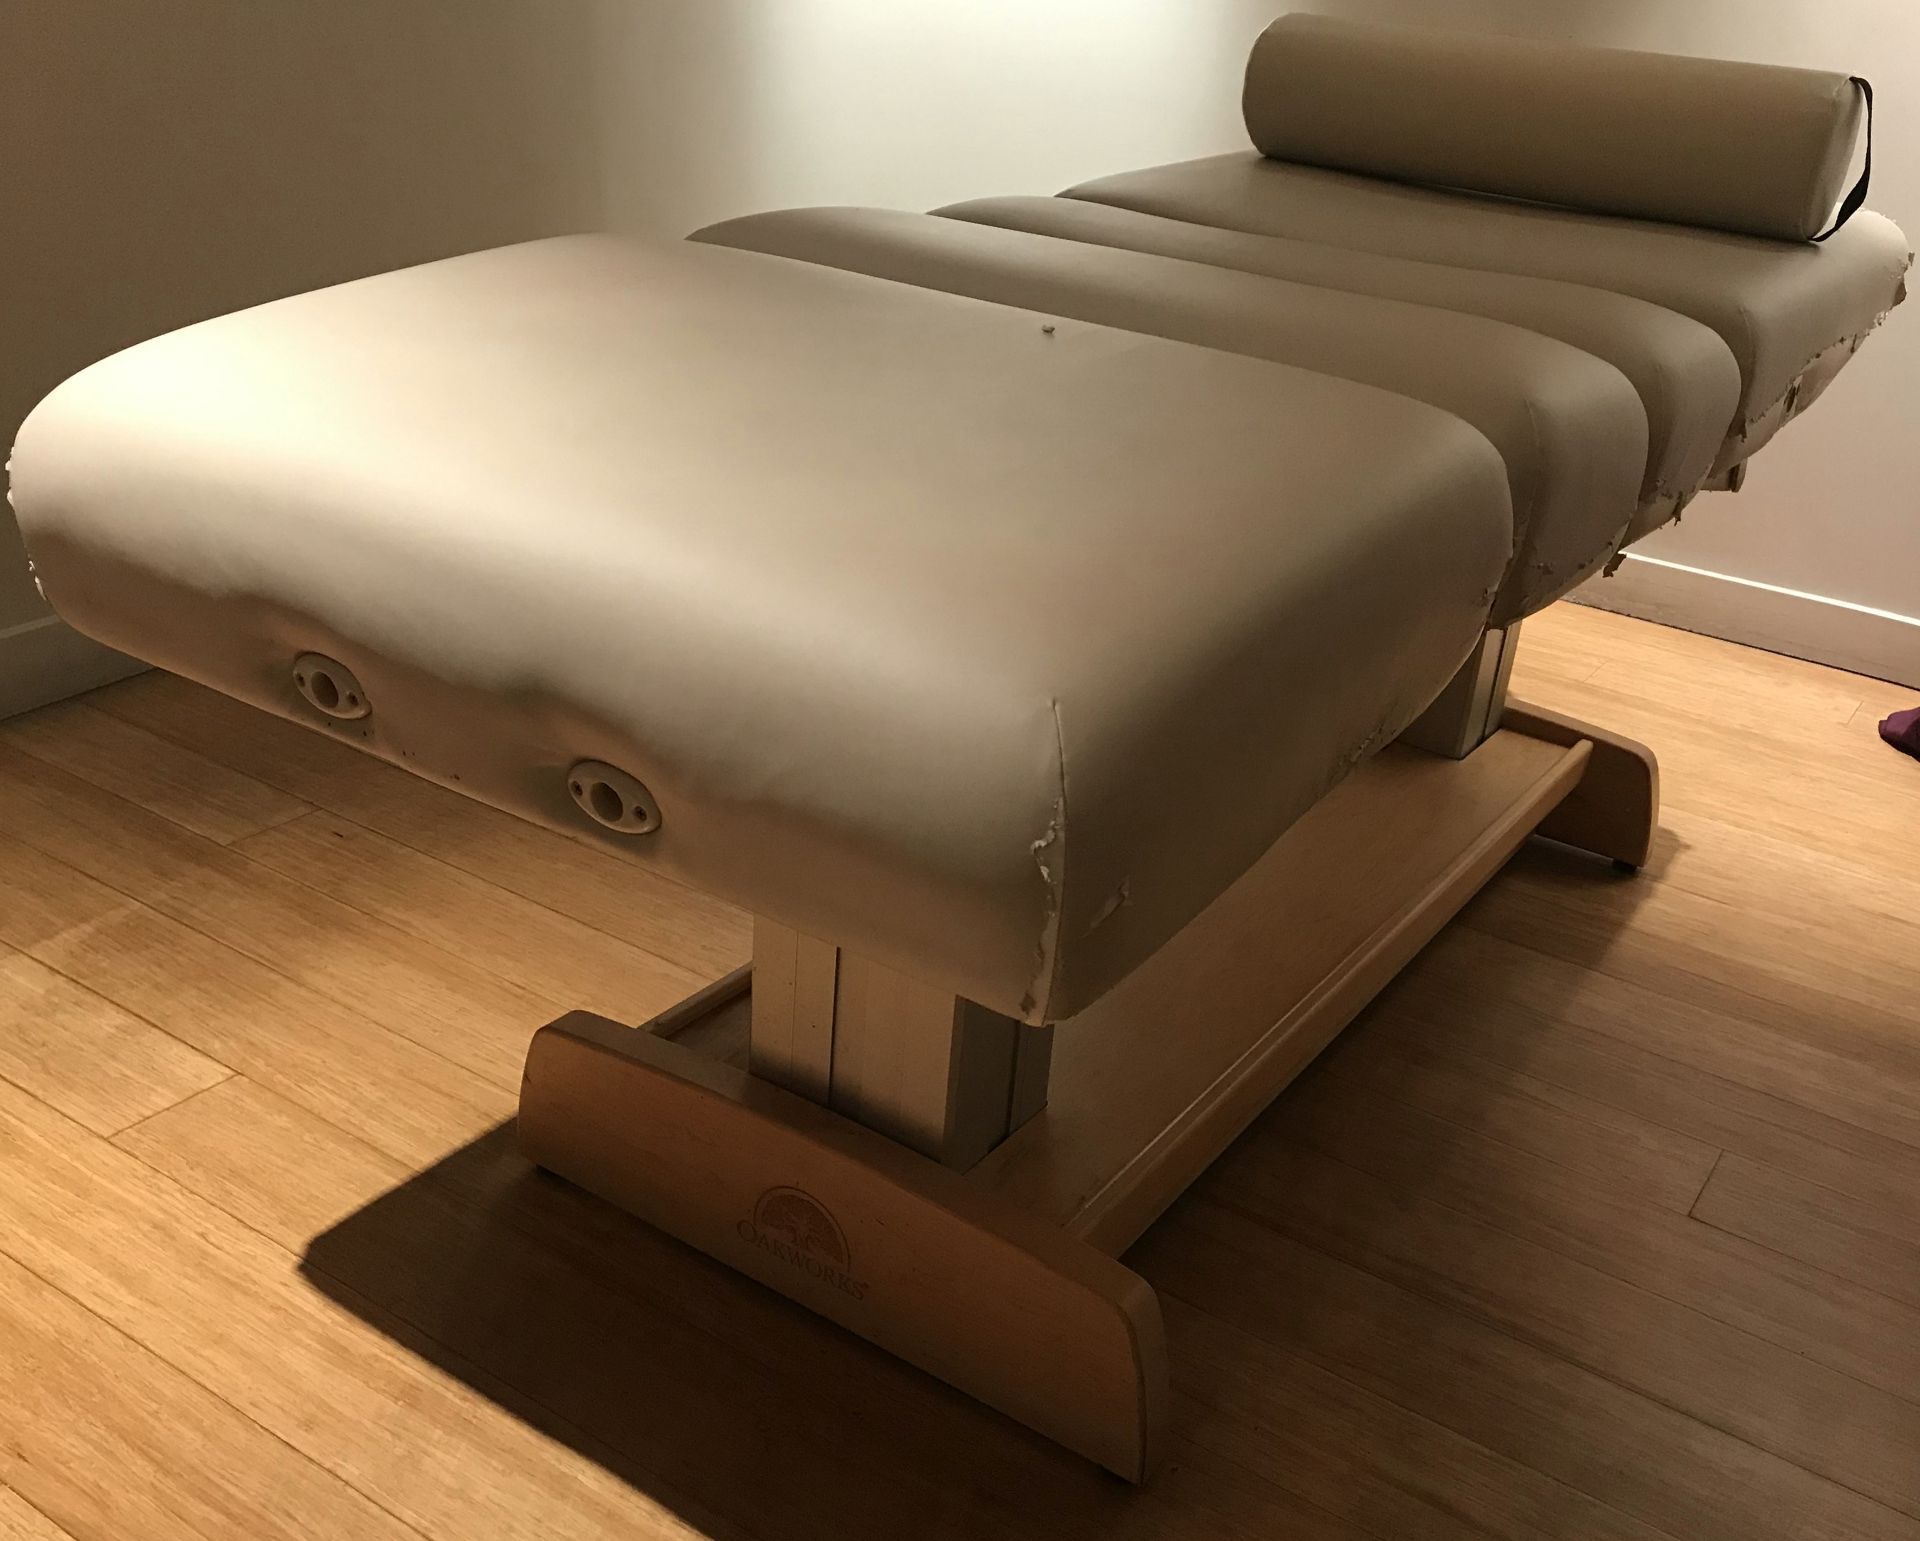 1 x Oakworks Clinician Electric-Hydraulic Massage Table With Footpedal and Linak HBWO Remote Control - Image 8 of 11